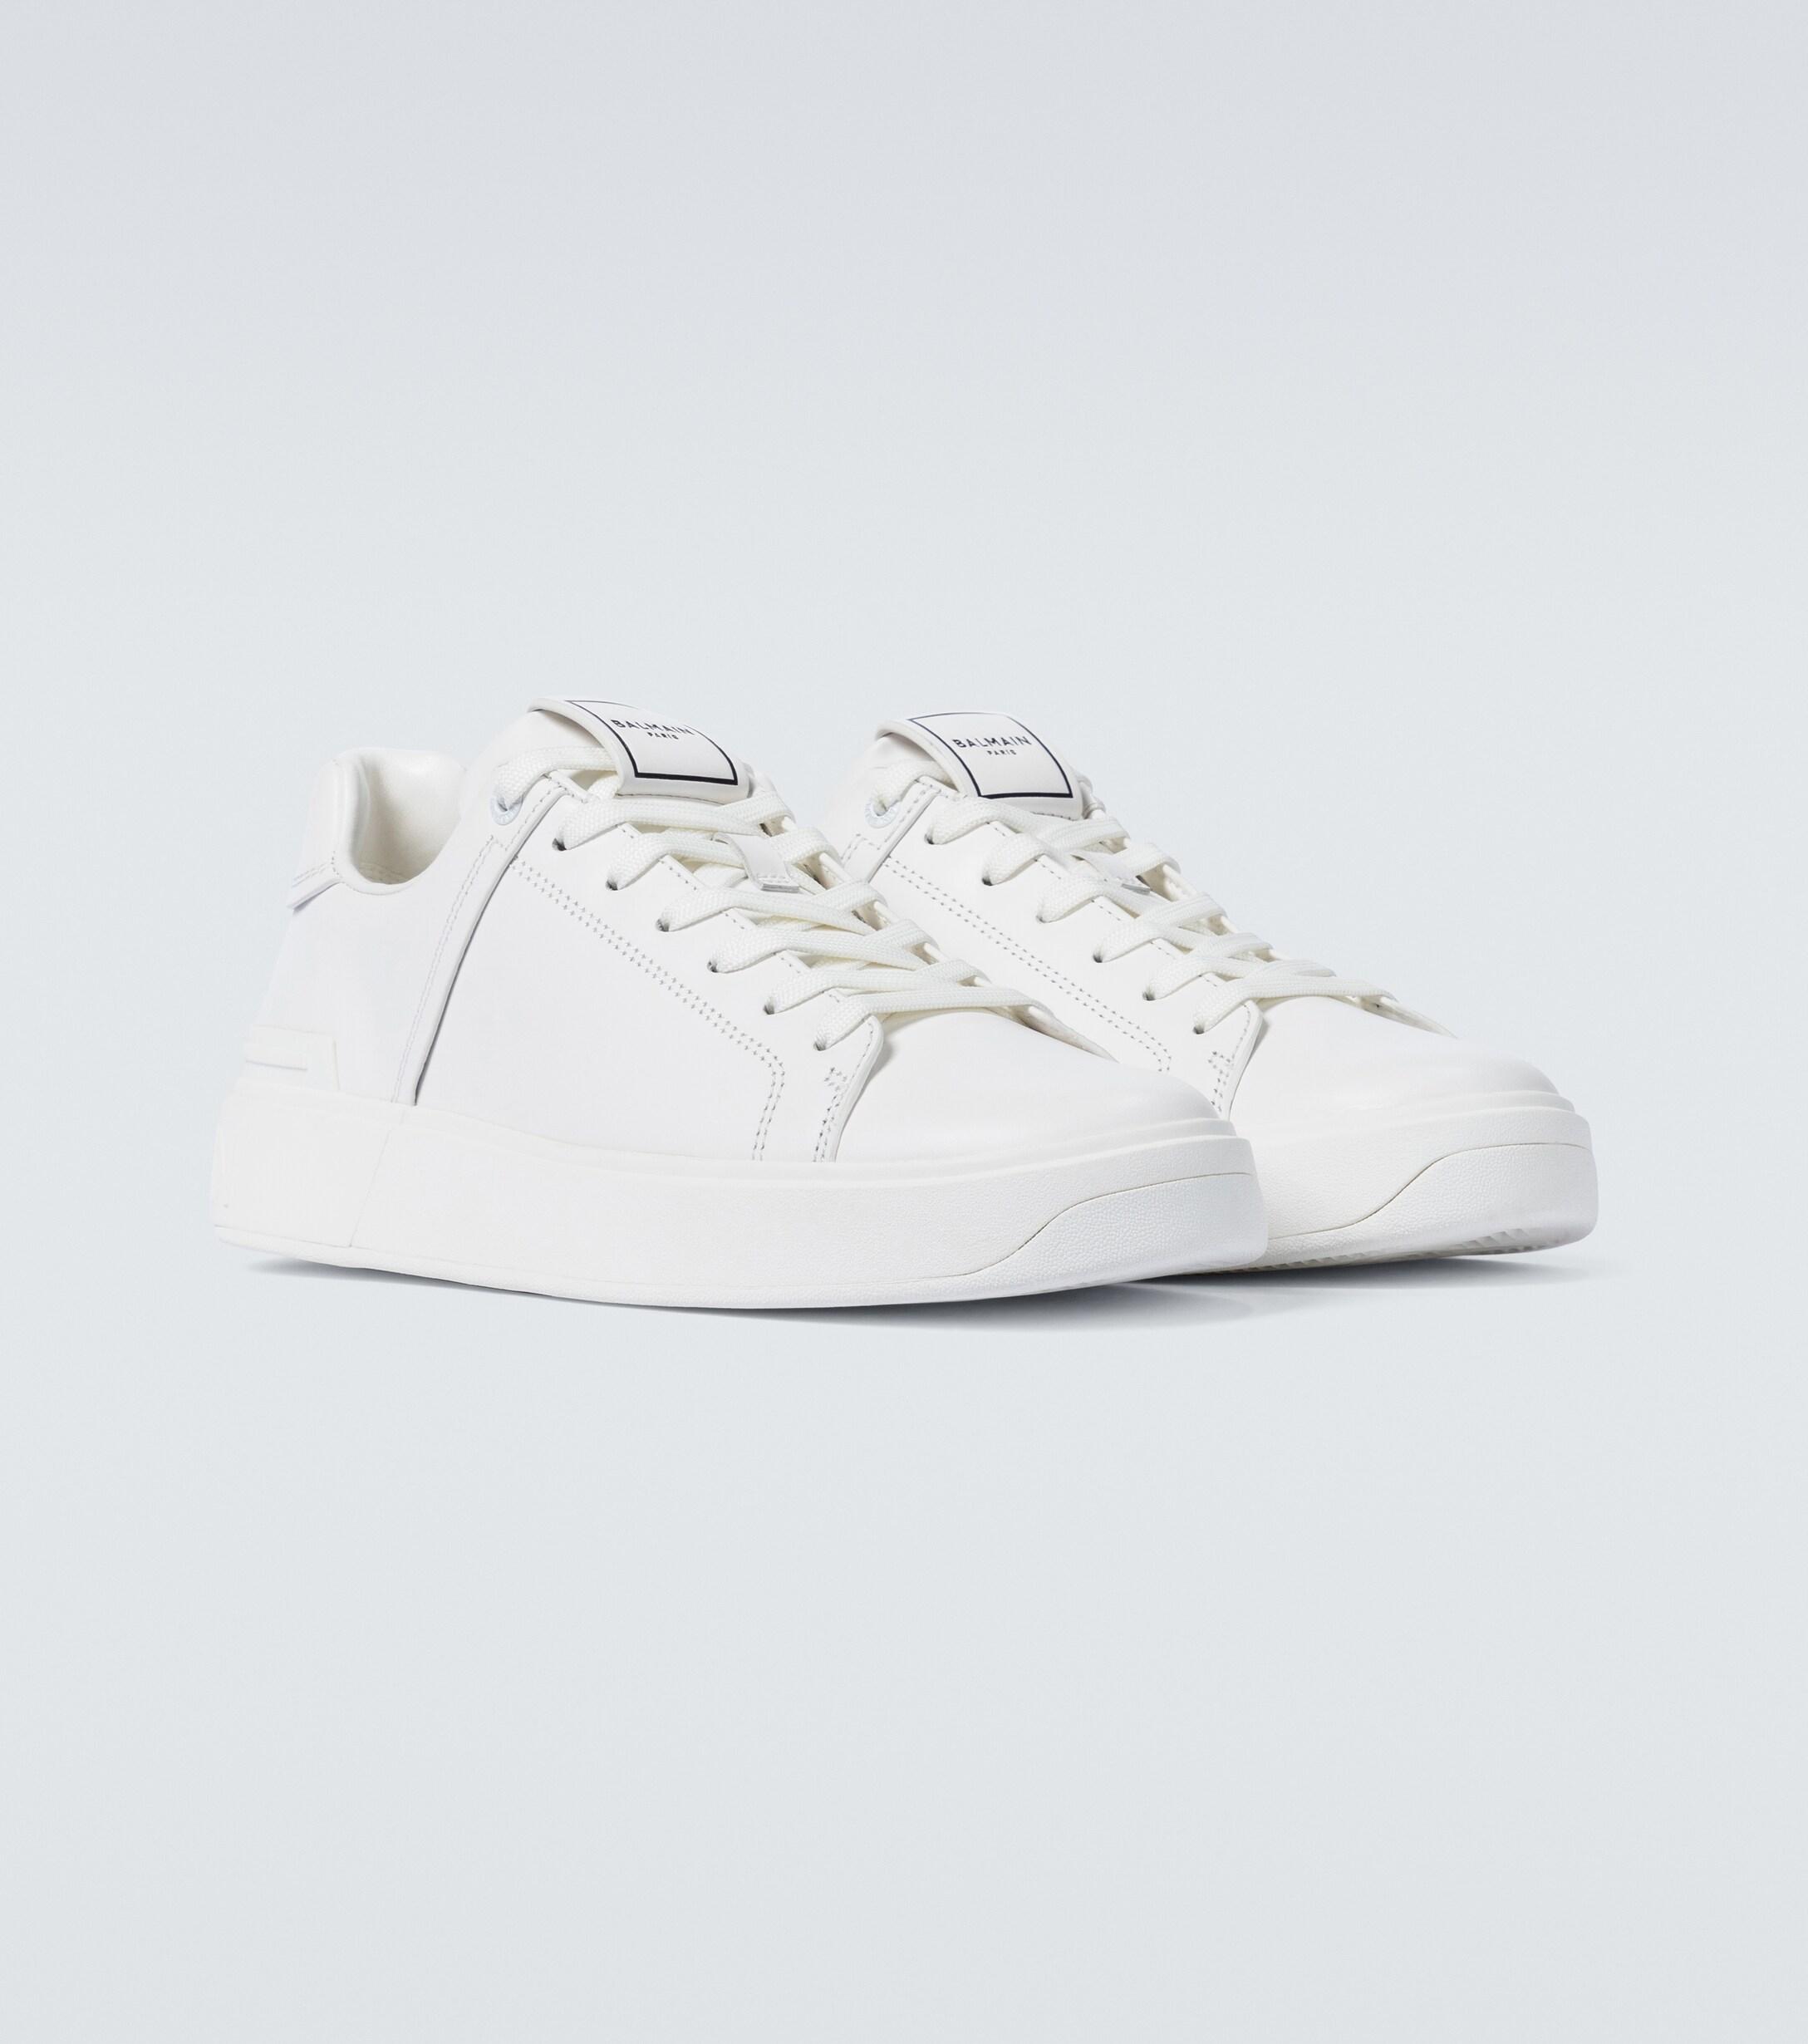 Balmain B-court Leather Sneakers in White for Men - Lyst